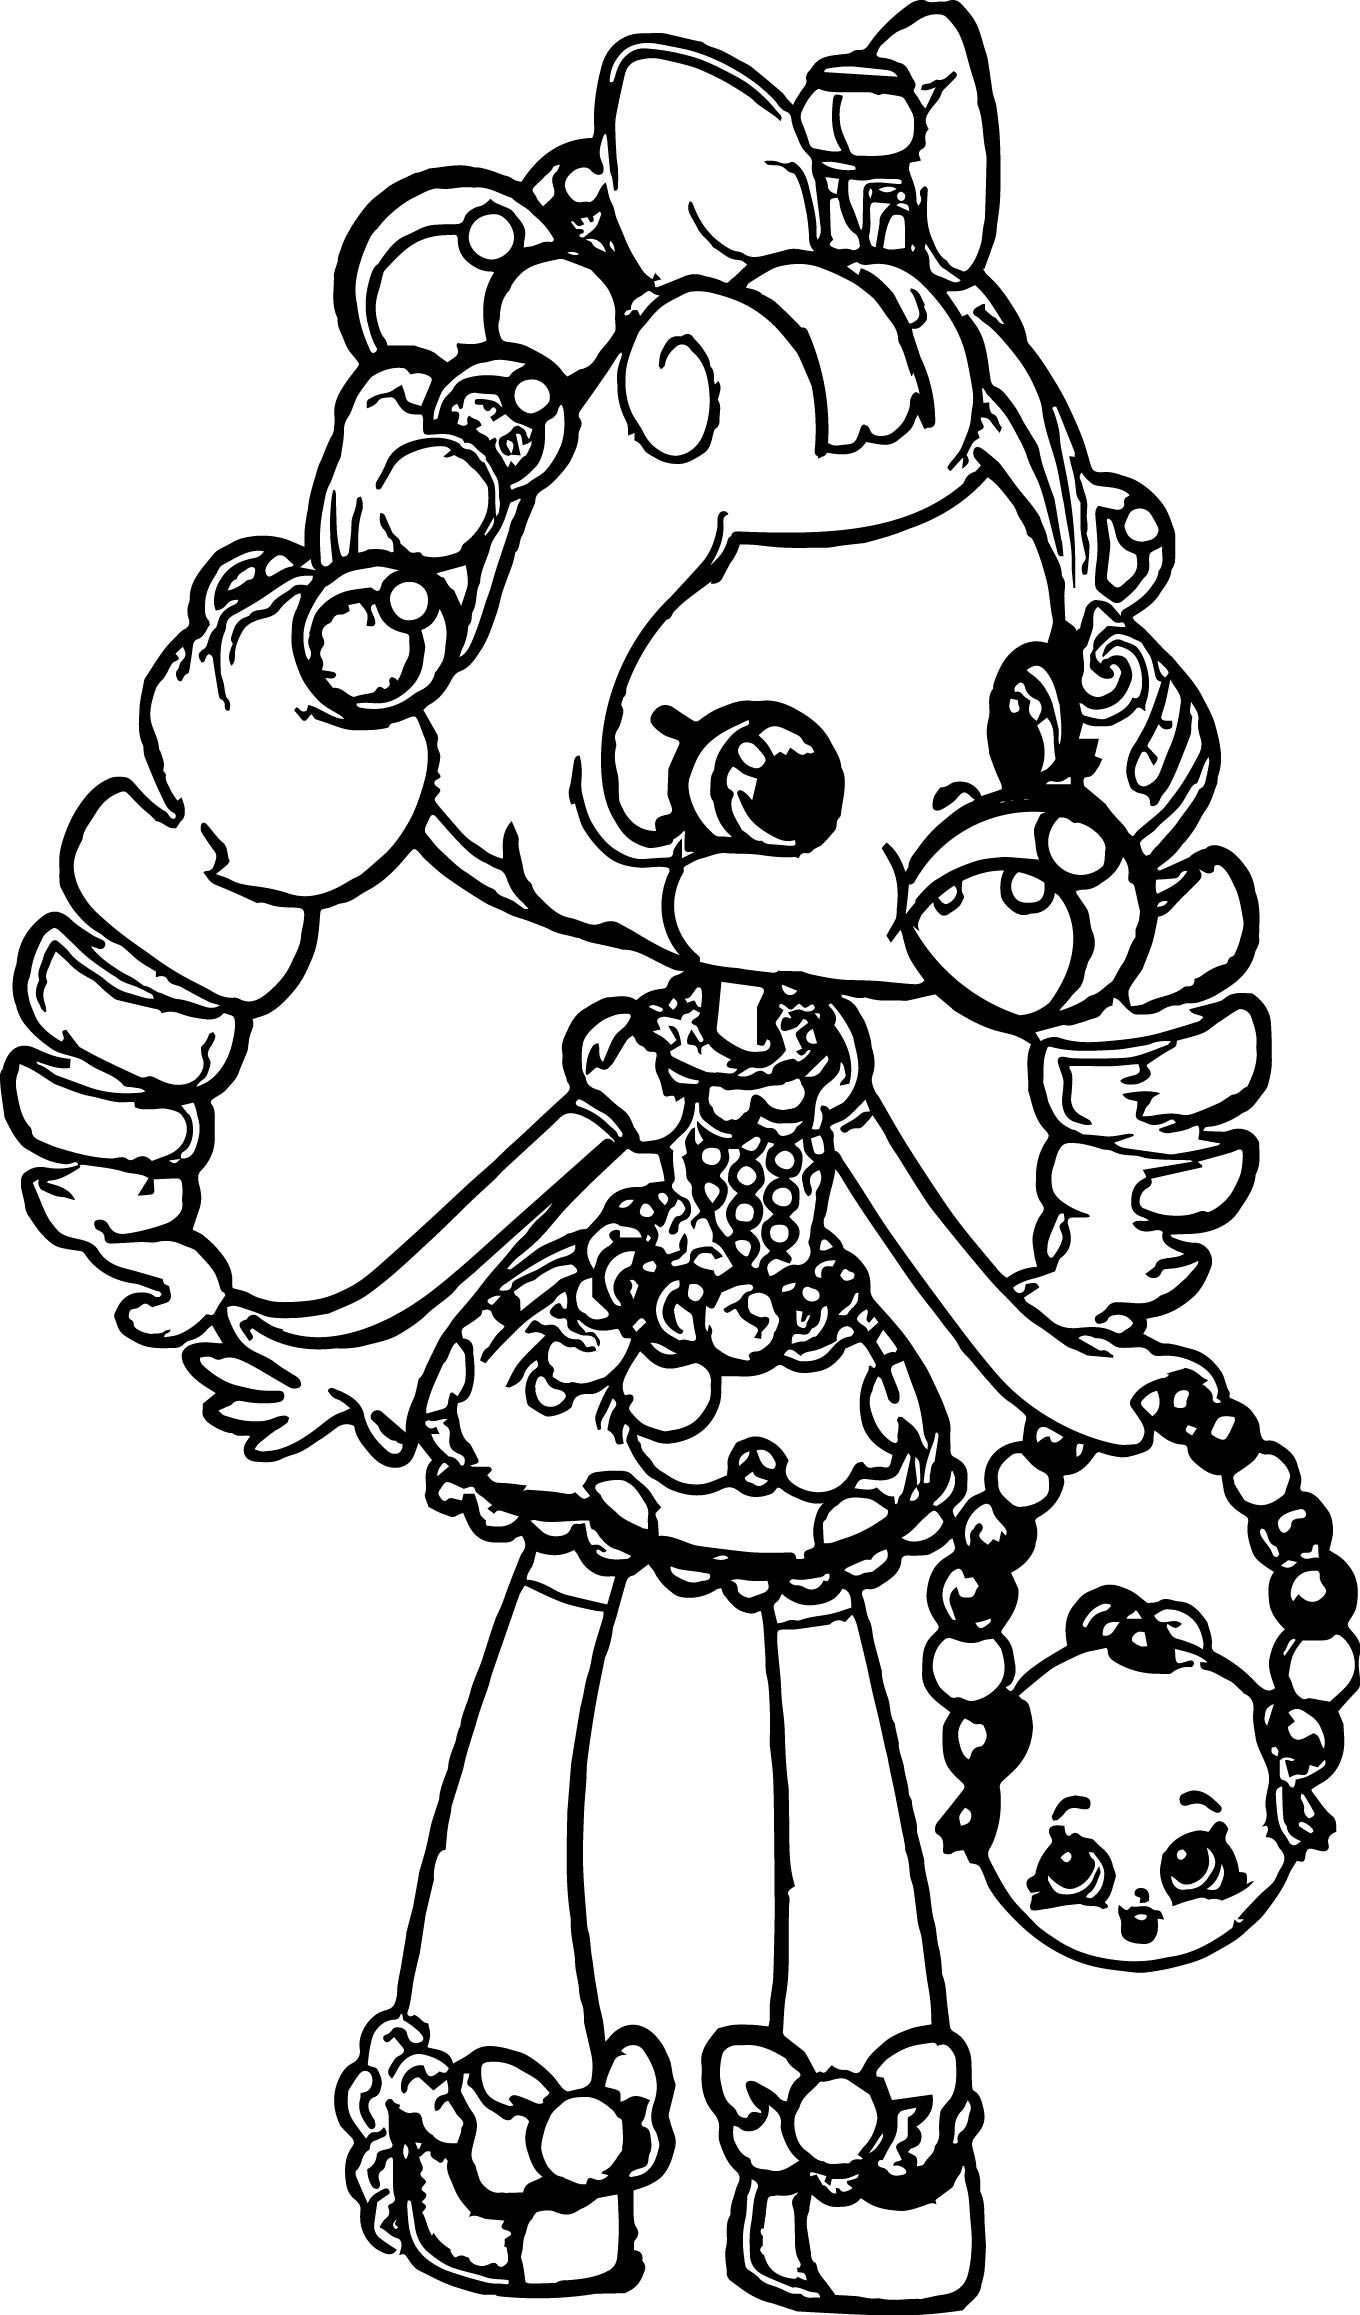 Coloring Pages For Girls Shopkins
 Shopkins Coloring Pages For Girls at GetColorings